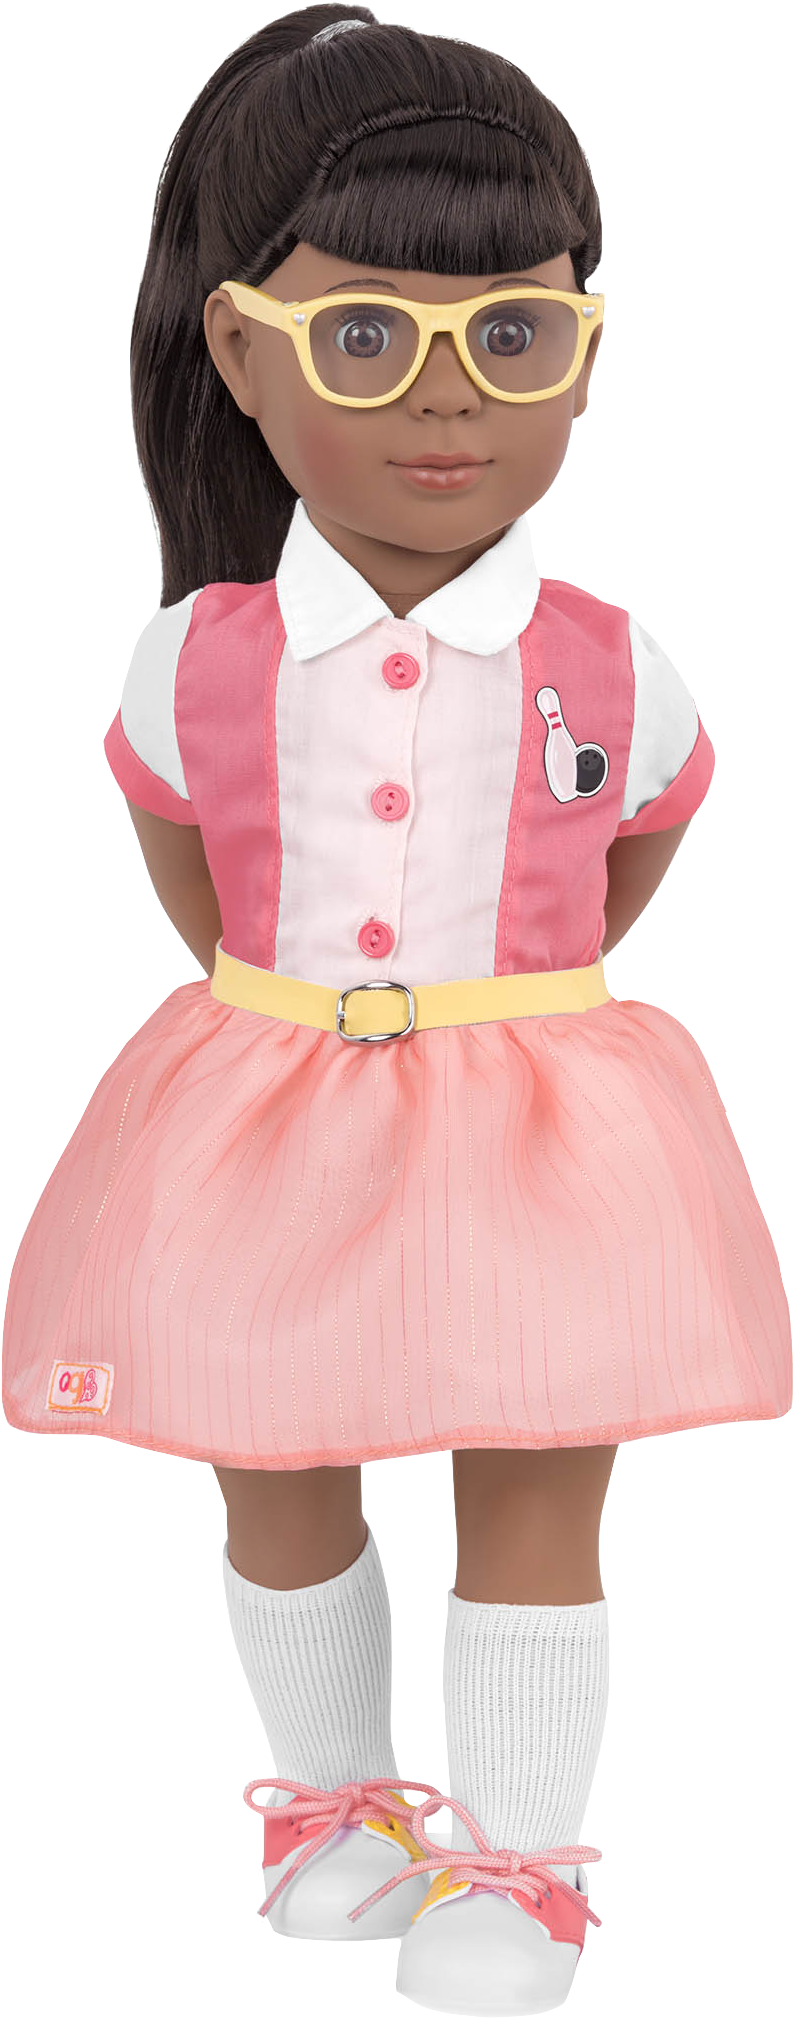 A Doll In A Pink Dress